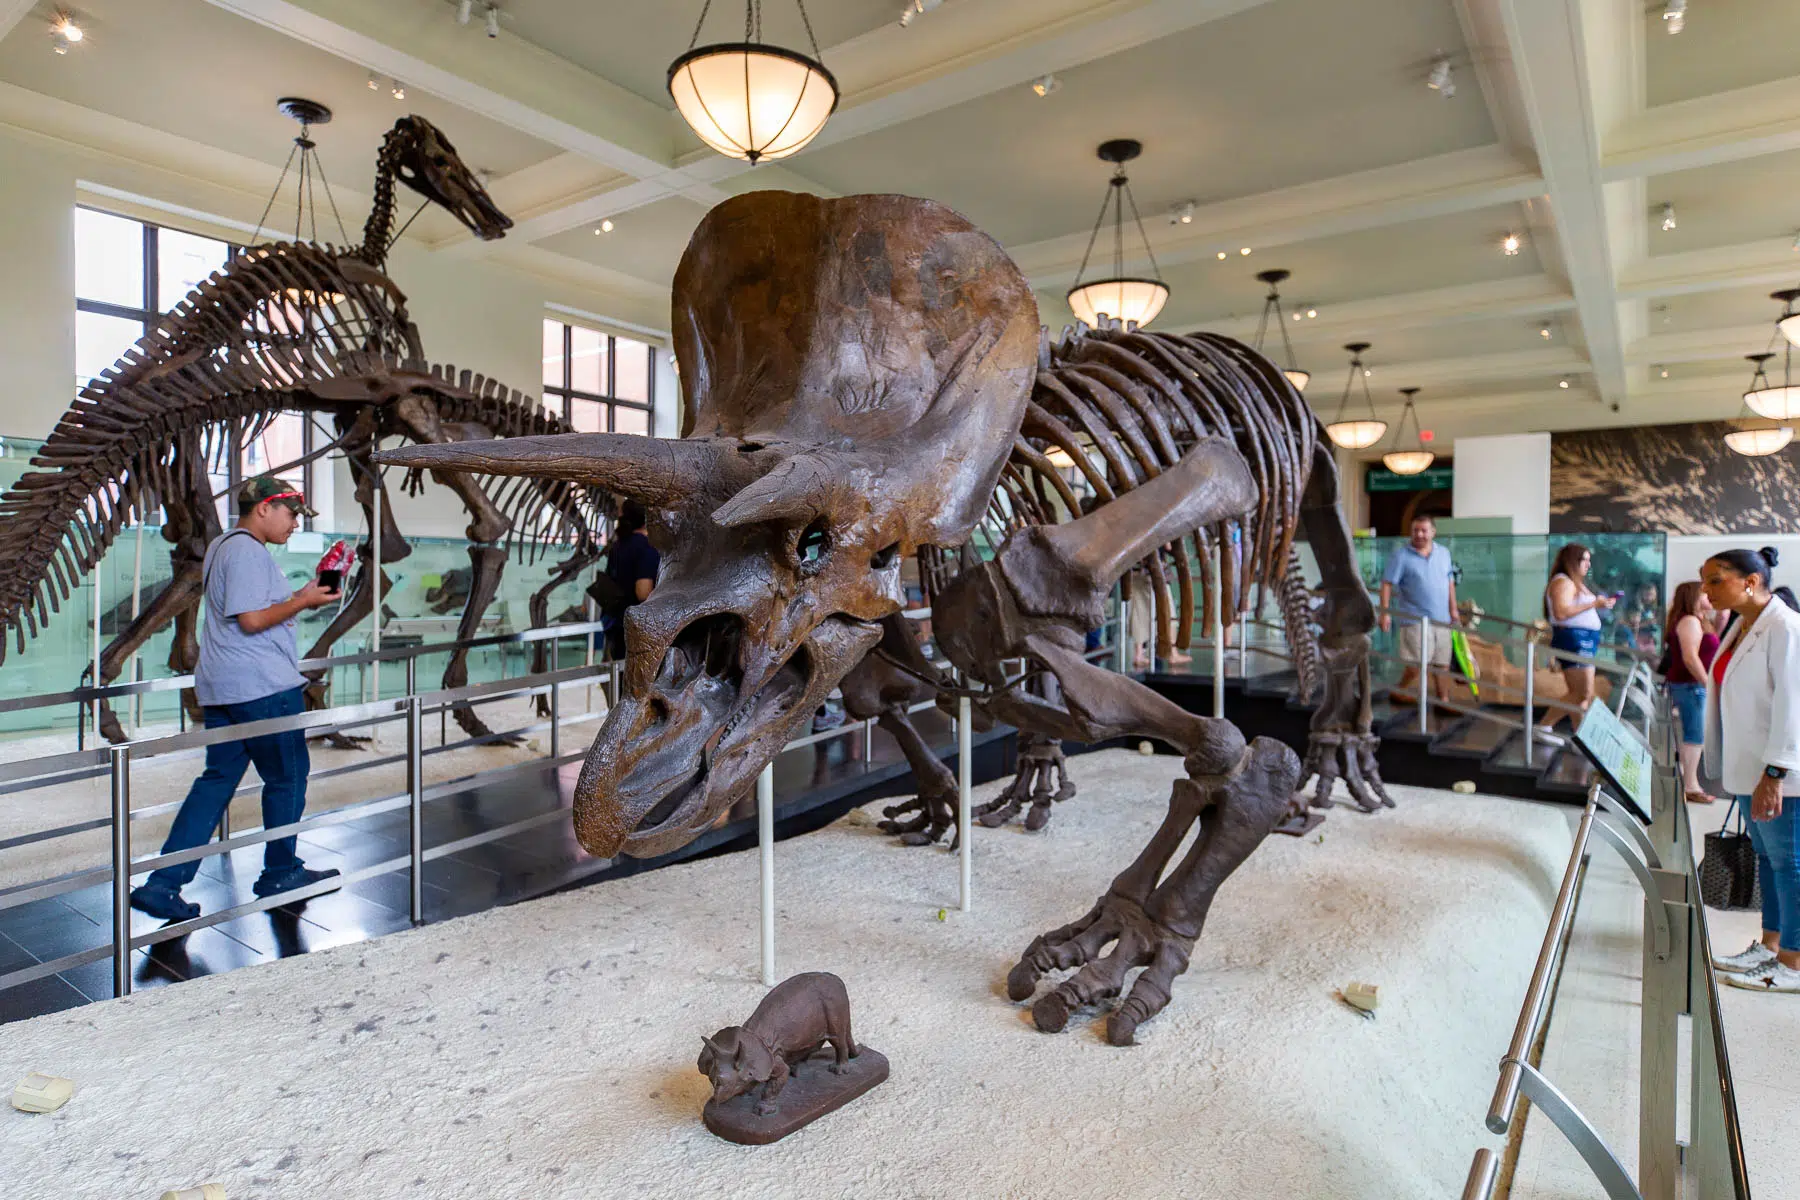 Things to see at the American Museum of Natural History, Fossils, Triceratops